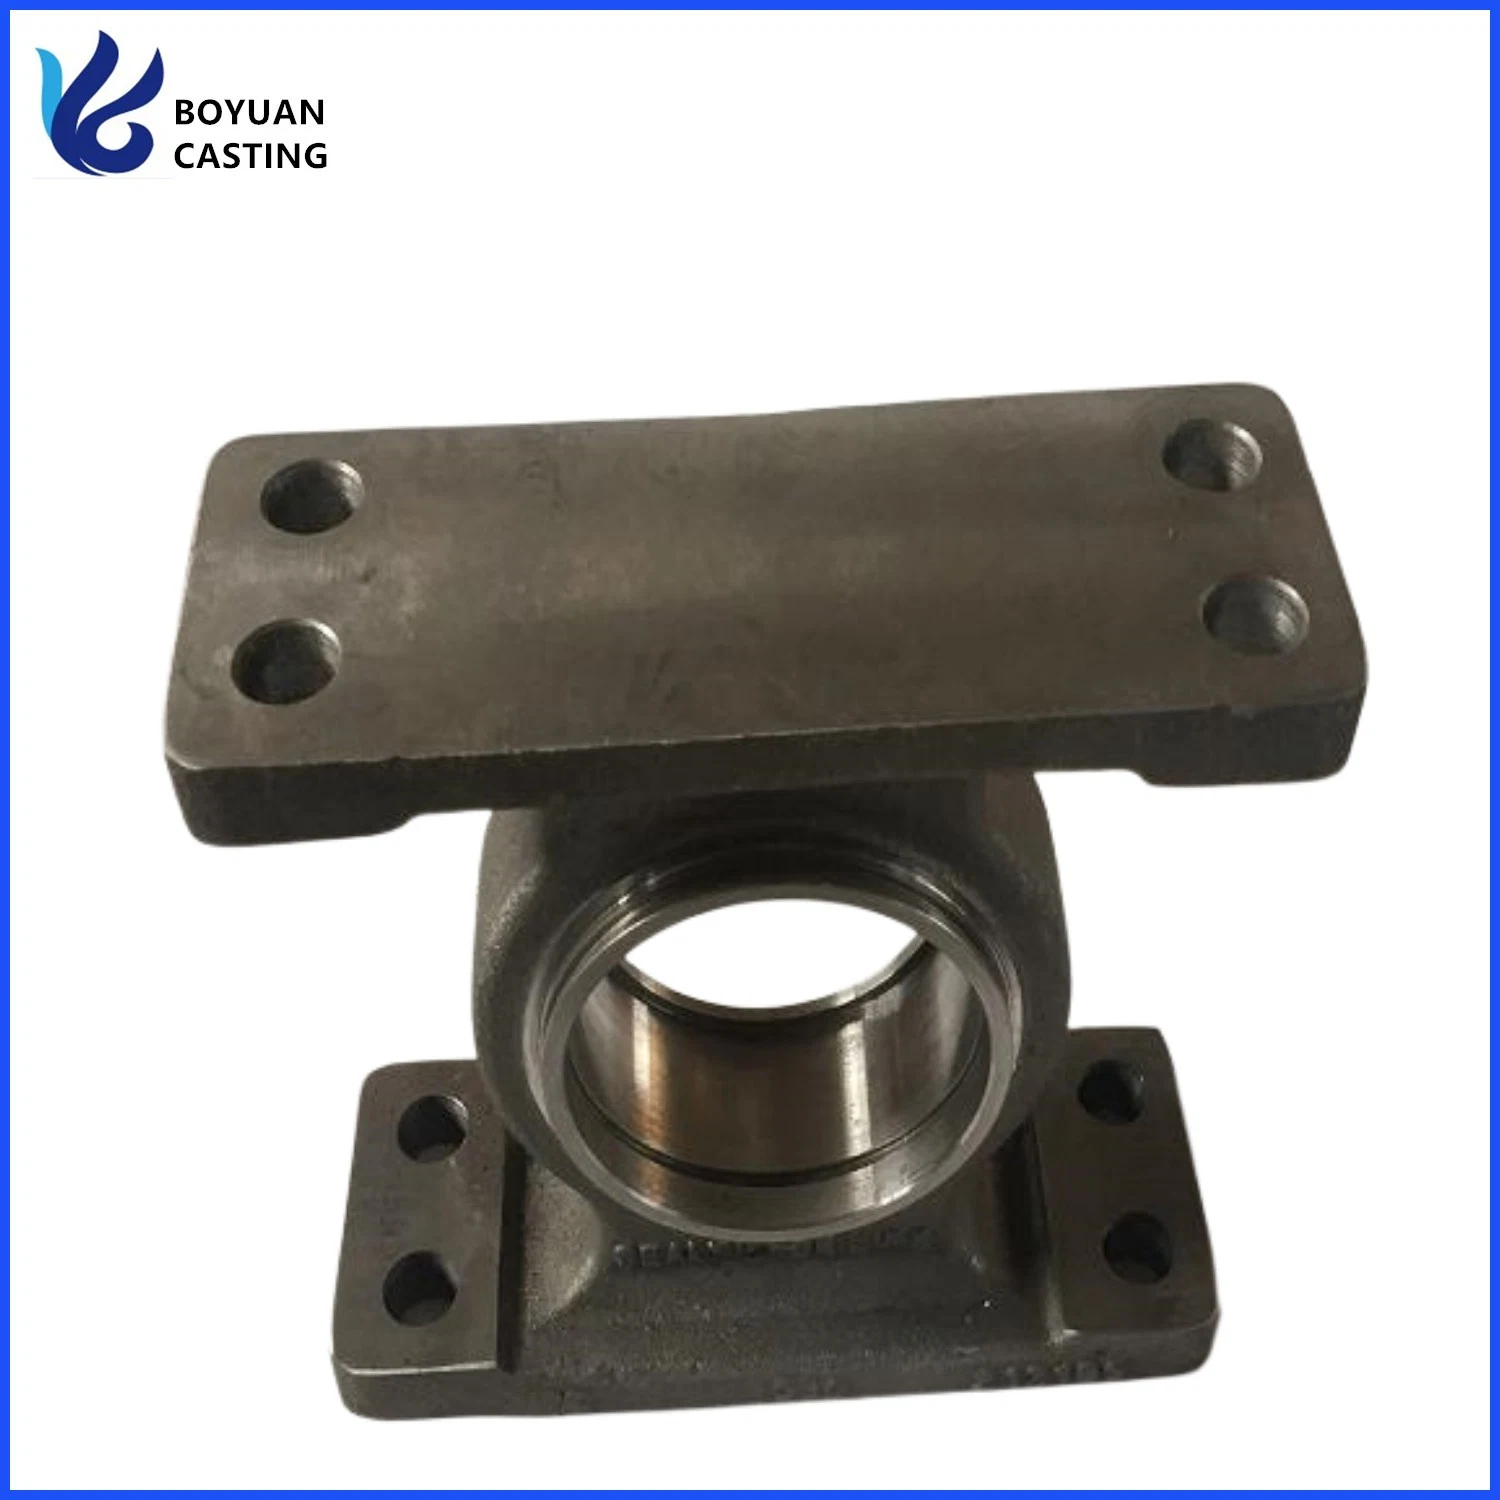 Stainless Steel Investment Precision Casting Engine Part for Auto Engine Machinery